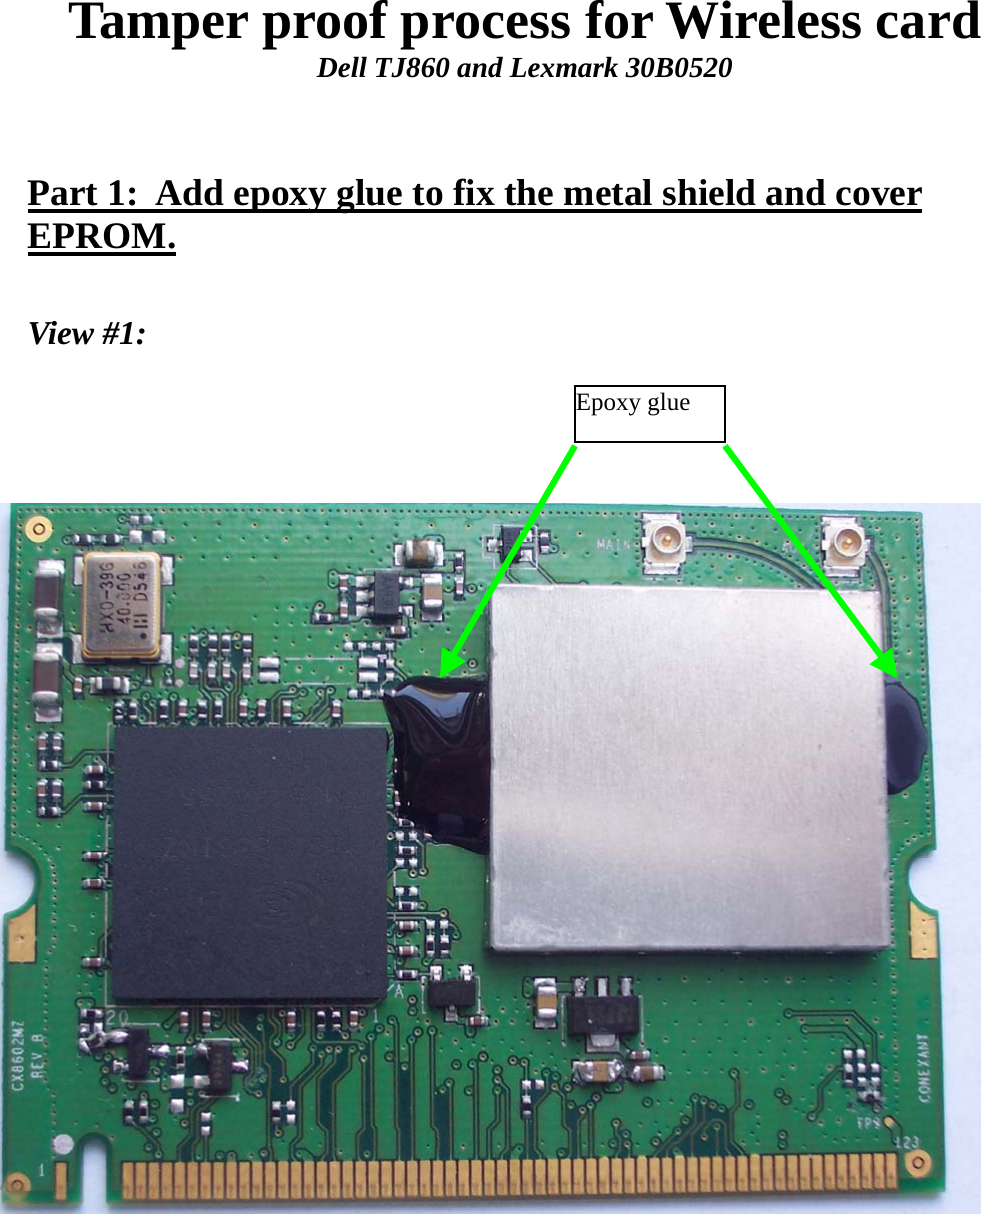 Tamper proof process for Wireless cardDell TJ860 and Lexmark 30B0520Part 1:  Add epoxy glue to fix the metal shield and coverEPROM.View #1:Epoxy glue